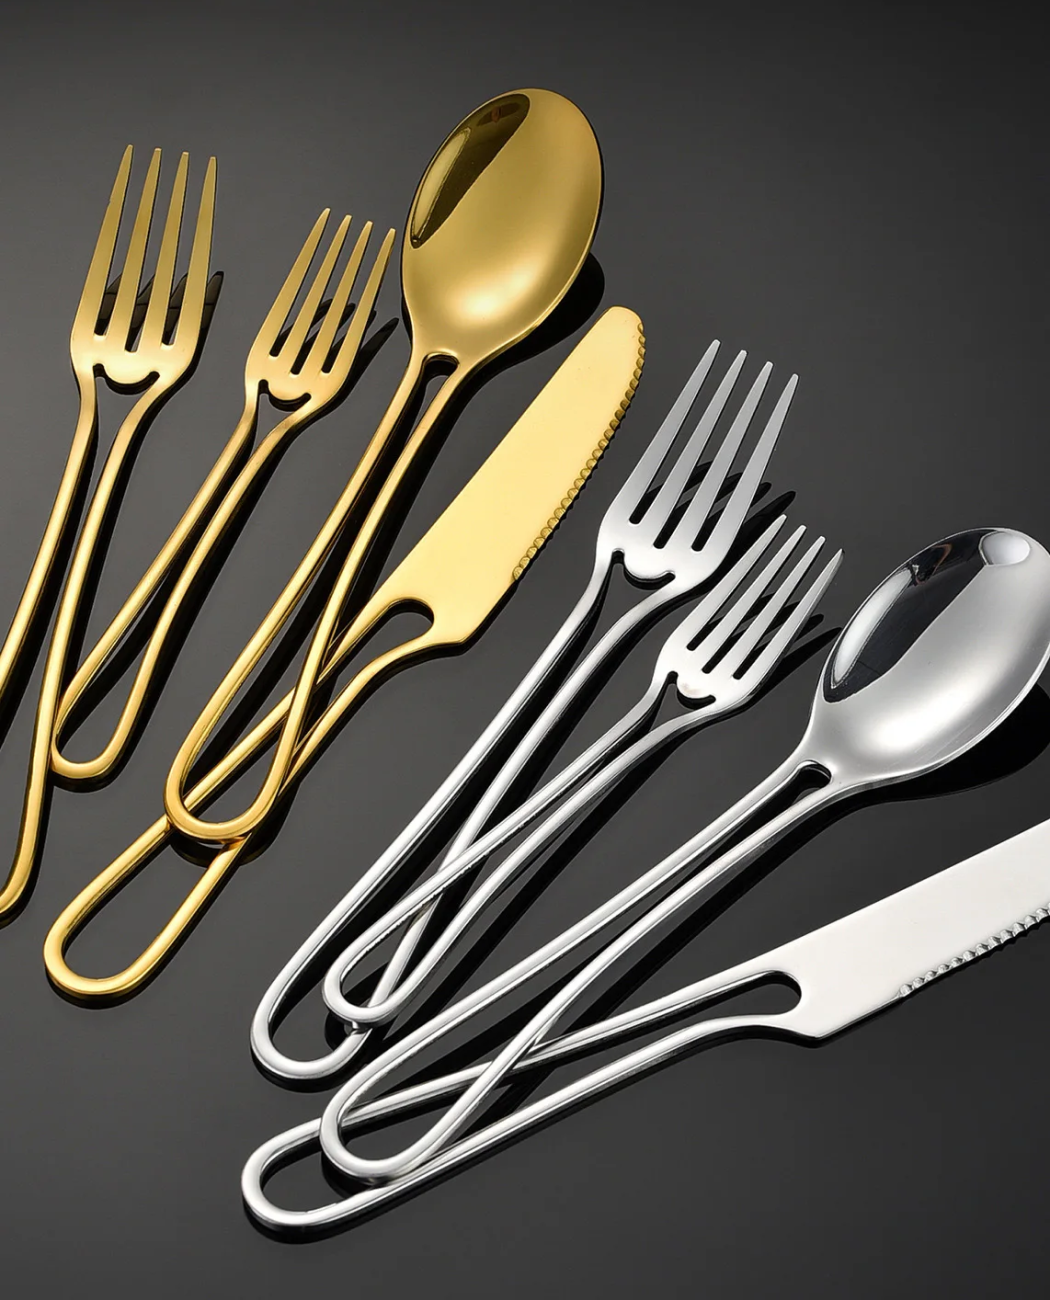 Gold And Silver Flatware With Stencil Like Cut Out Handles Minimalist Silverware Forks Spoons And Knives In Stylish Shiny Sets For Wedding Tables Dinner Parties And Everyday Dining